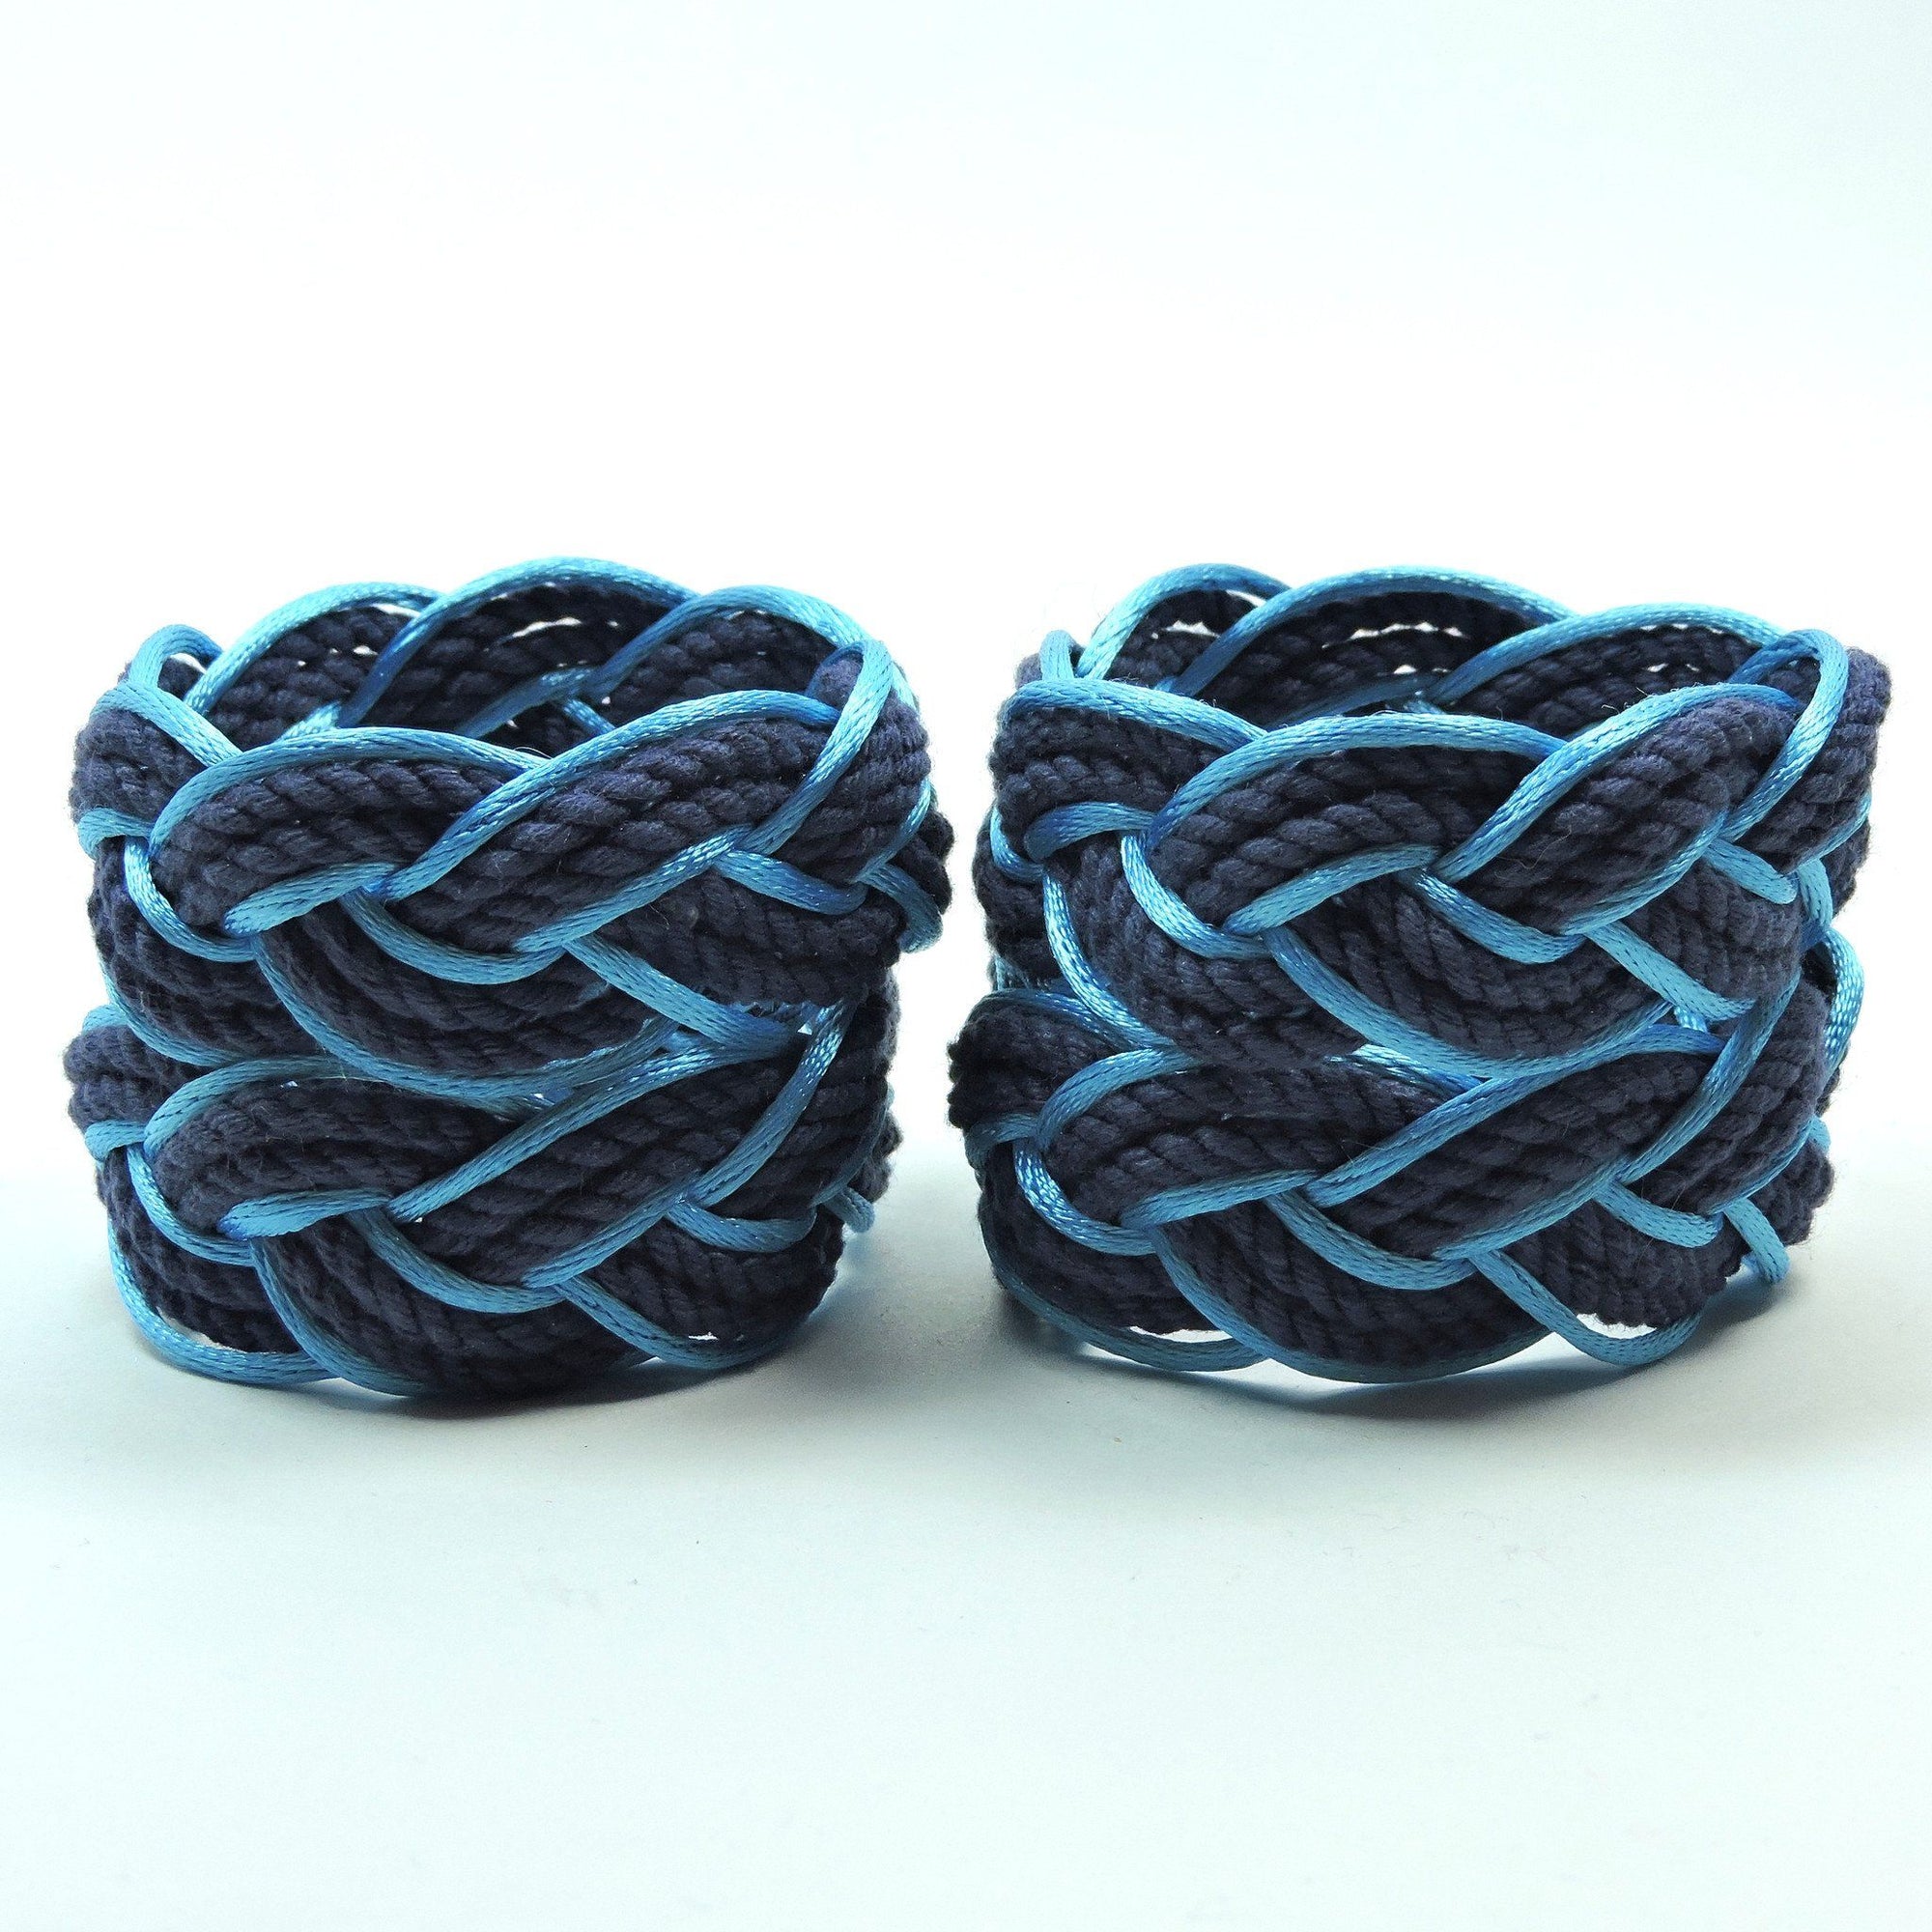 Nautical Knot Sailor Knot Napkin Rings, Navy Outlined in Turquoise Satin, Set of 4 - Limited Edition! handmade at Mystic Knotwork